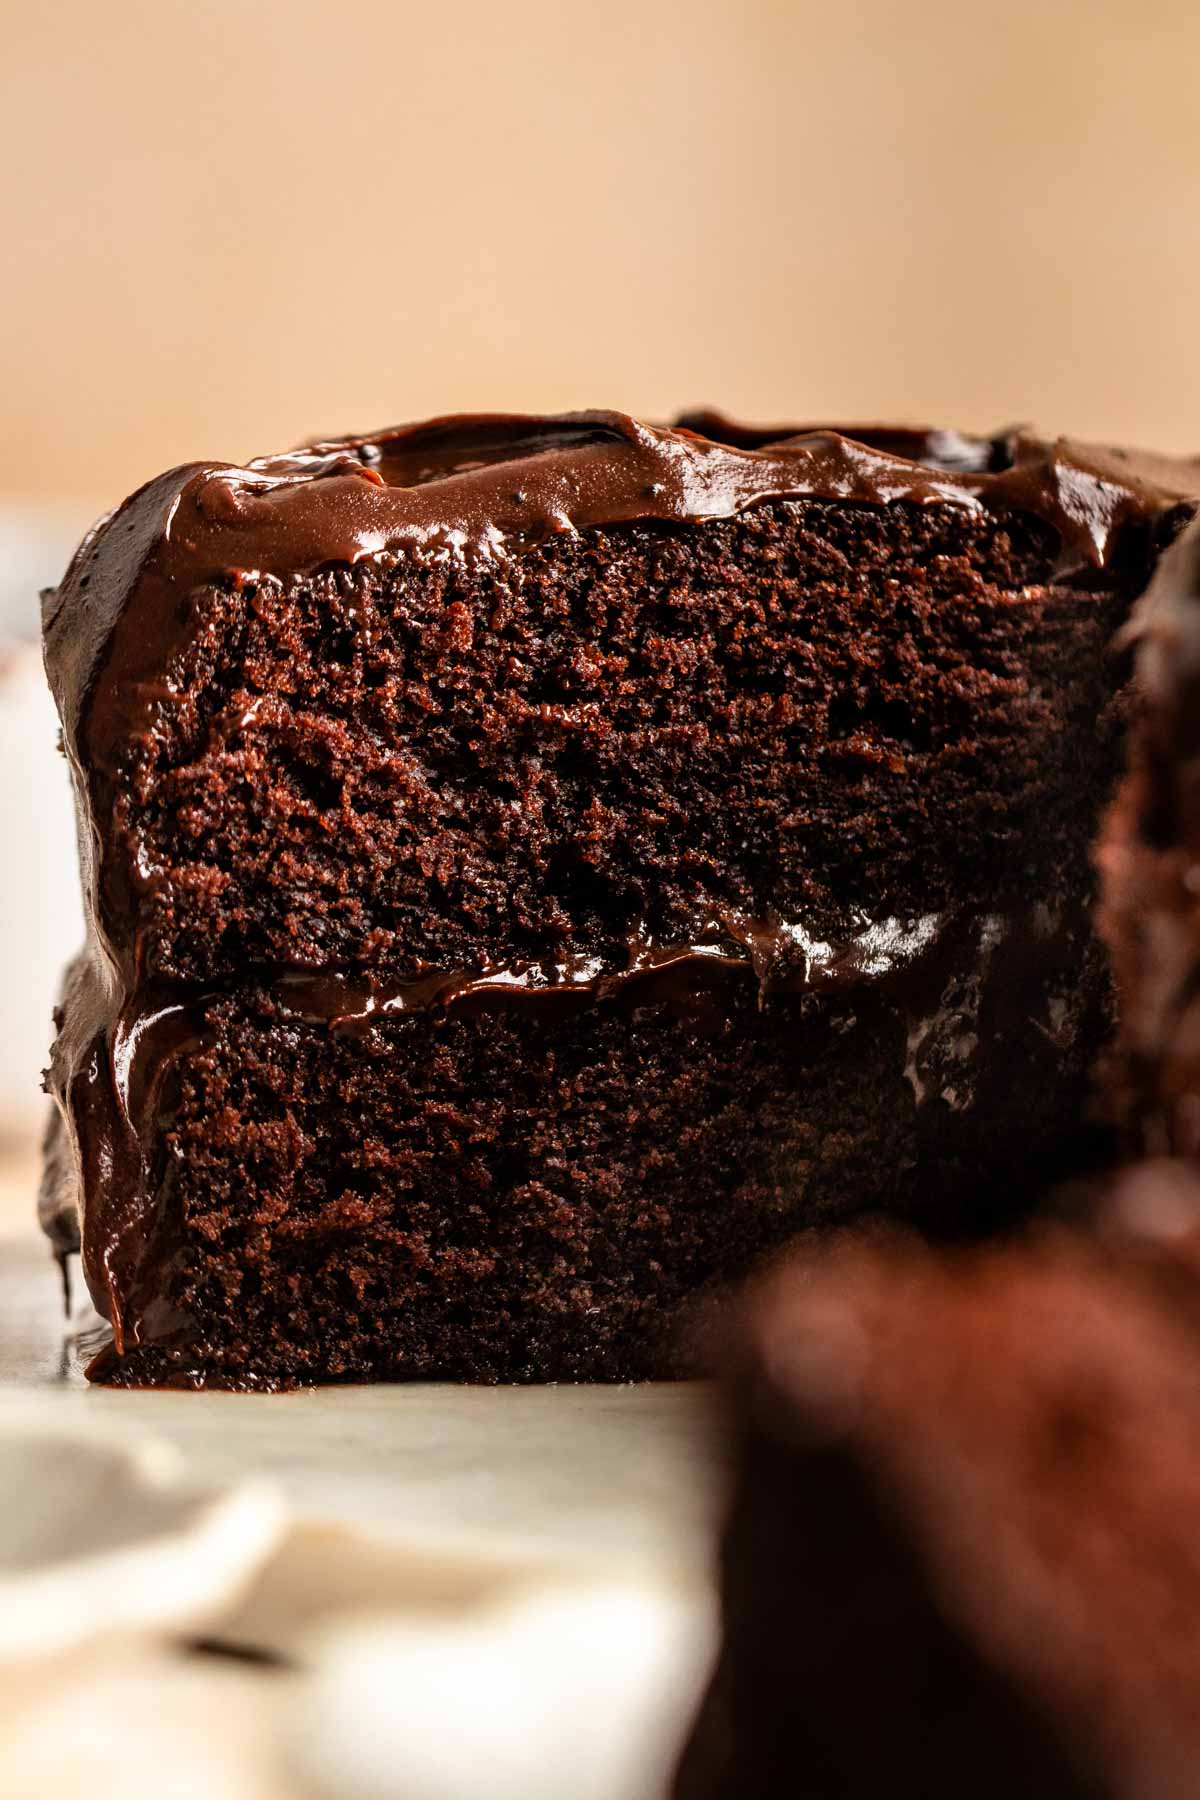 Close up of chocolate cake sliced open.